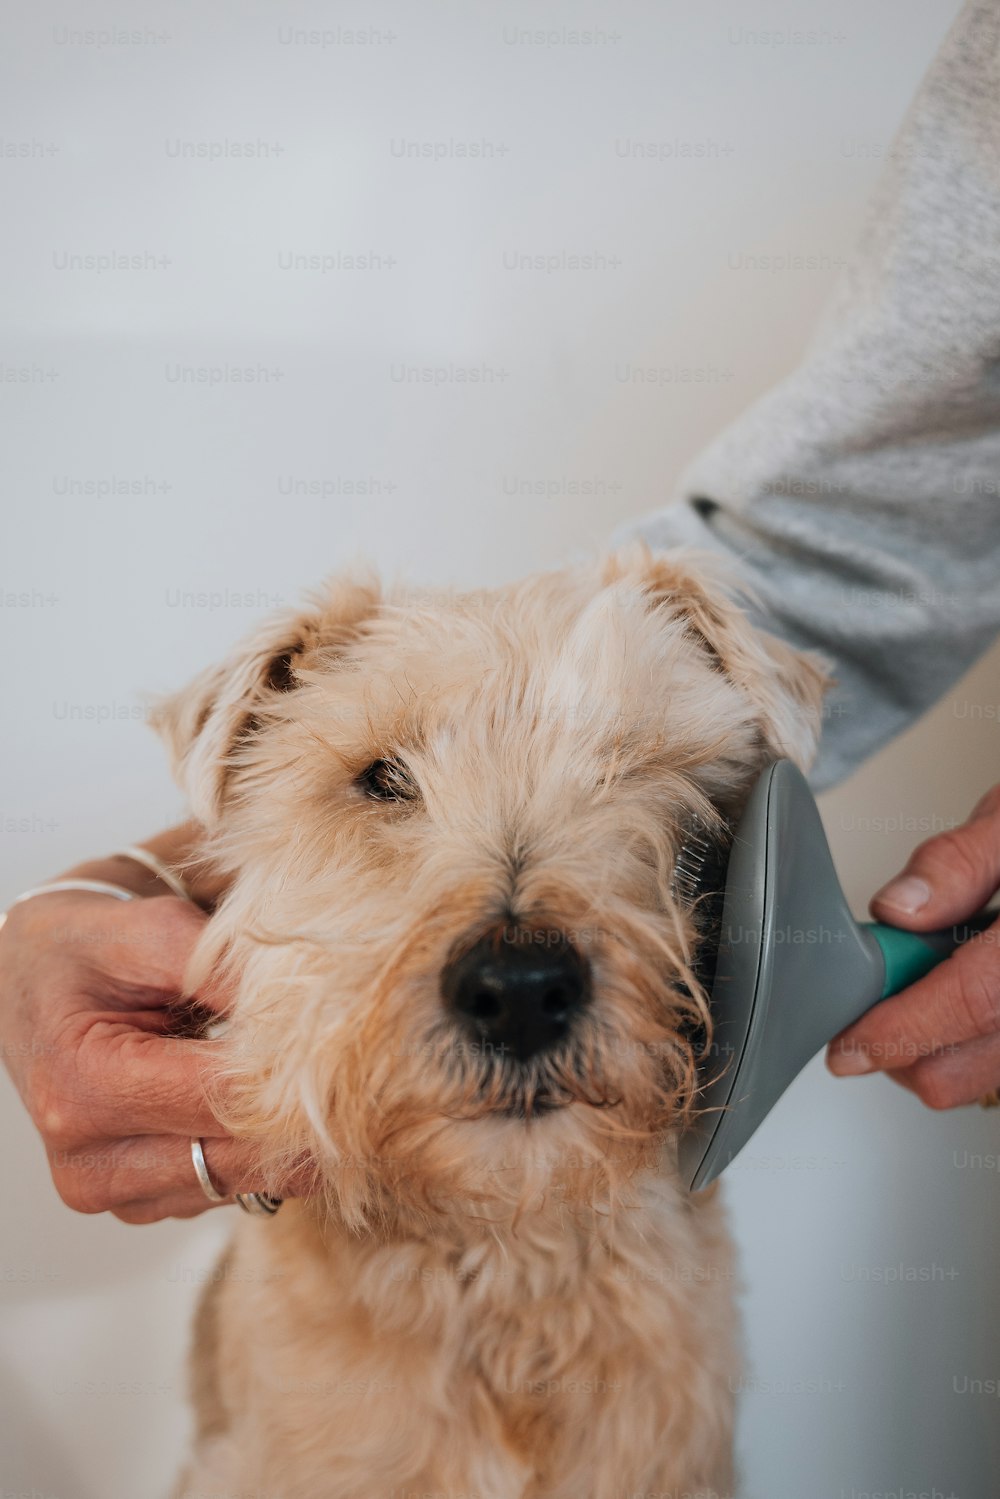 a dog being groomed by a person with a hair dryer